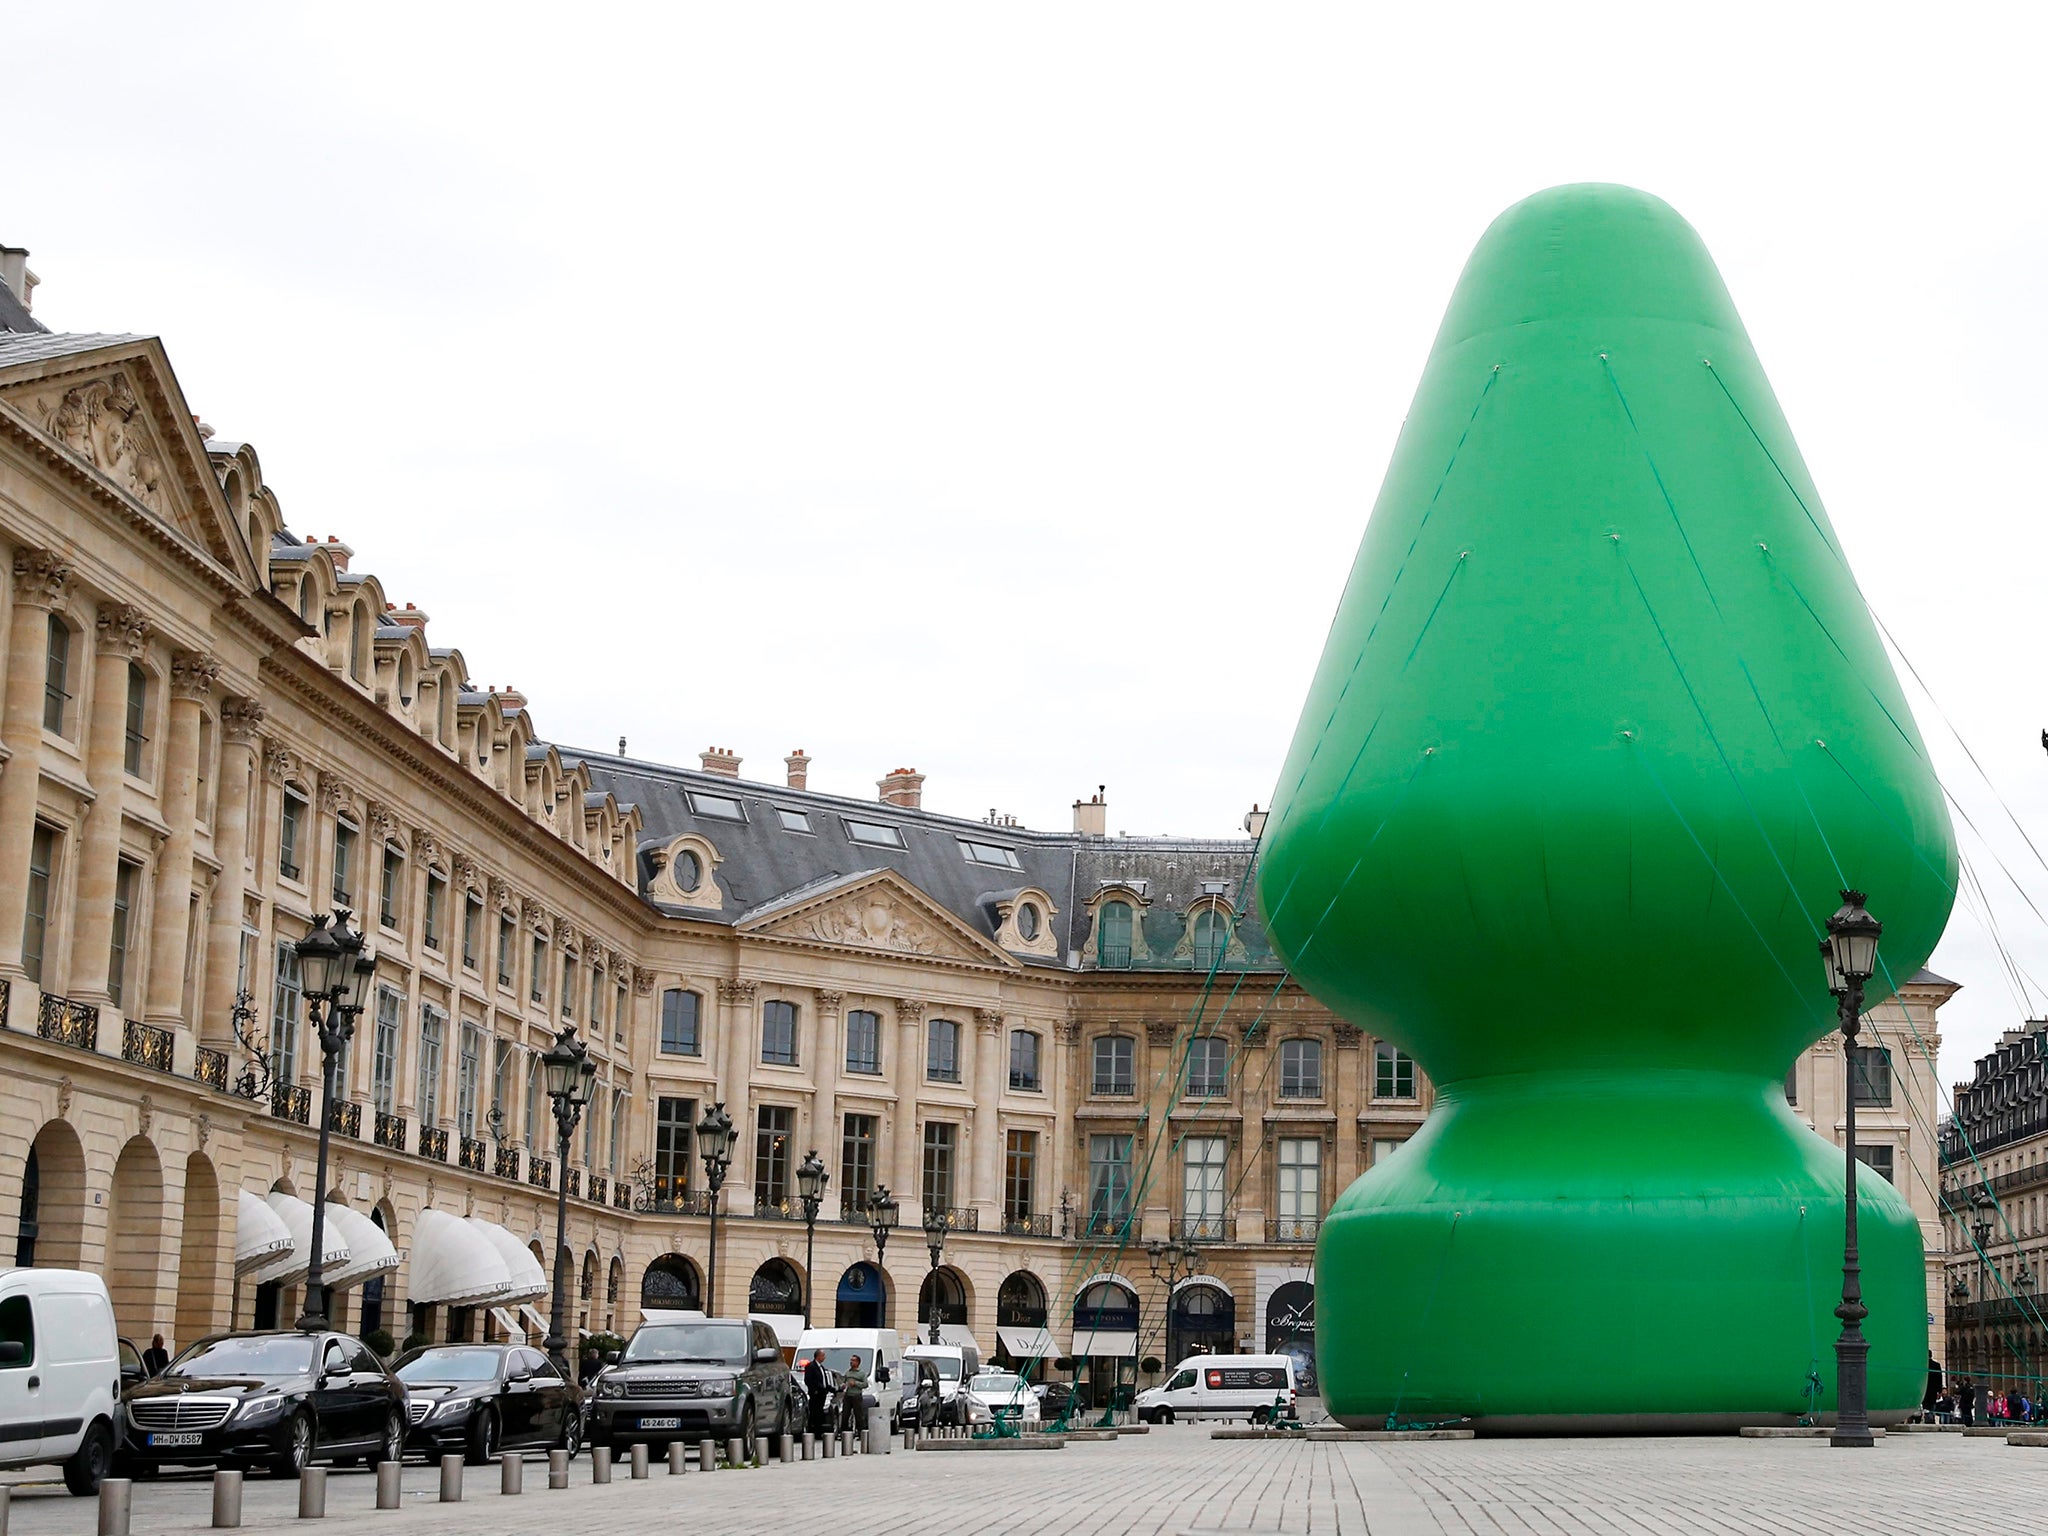 A sculpture entitled 'Tree' by US artist Paul McCarthy is on display at the Place Vendome in Paris, France, 16 October 2014. The 24.4 meter high piece is shown publicly as part of Paul McCarthy's exhibition 'Chocolate Factory' held at the Monnaie de Paris